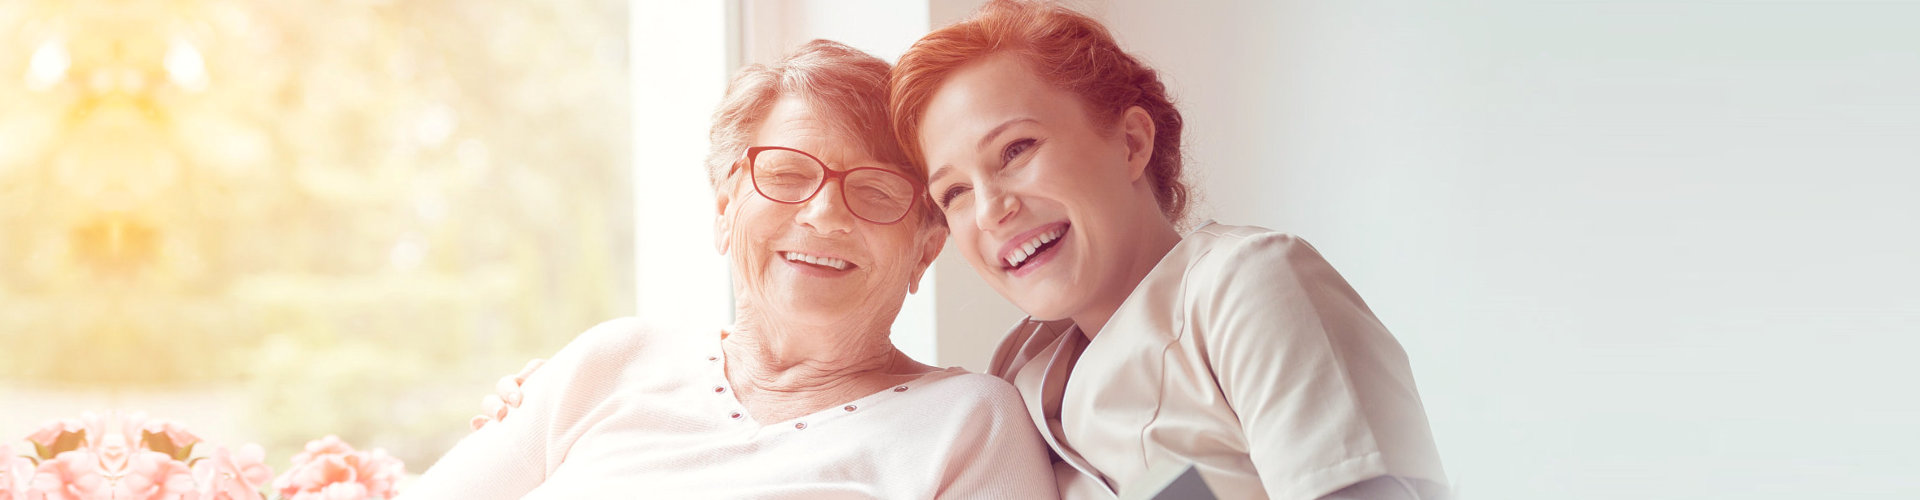 smiling elderly woman together with a middle aged woman